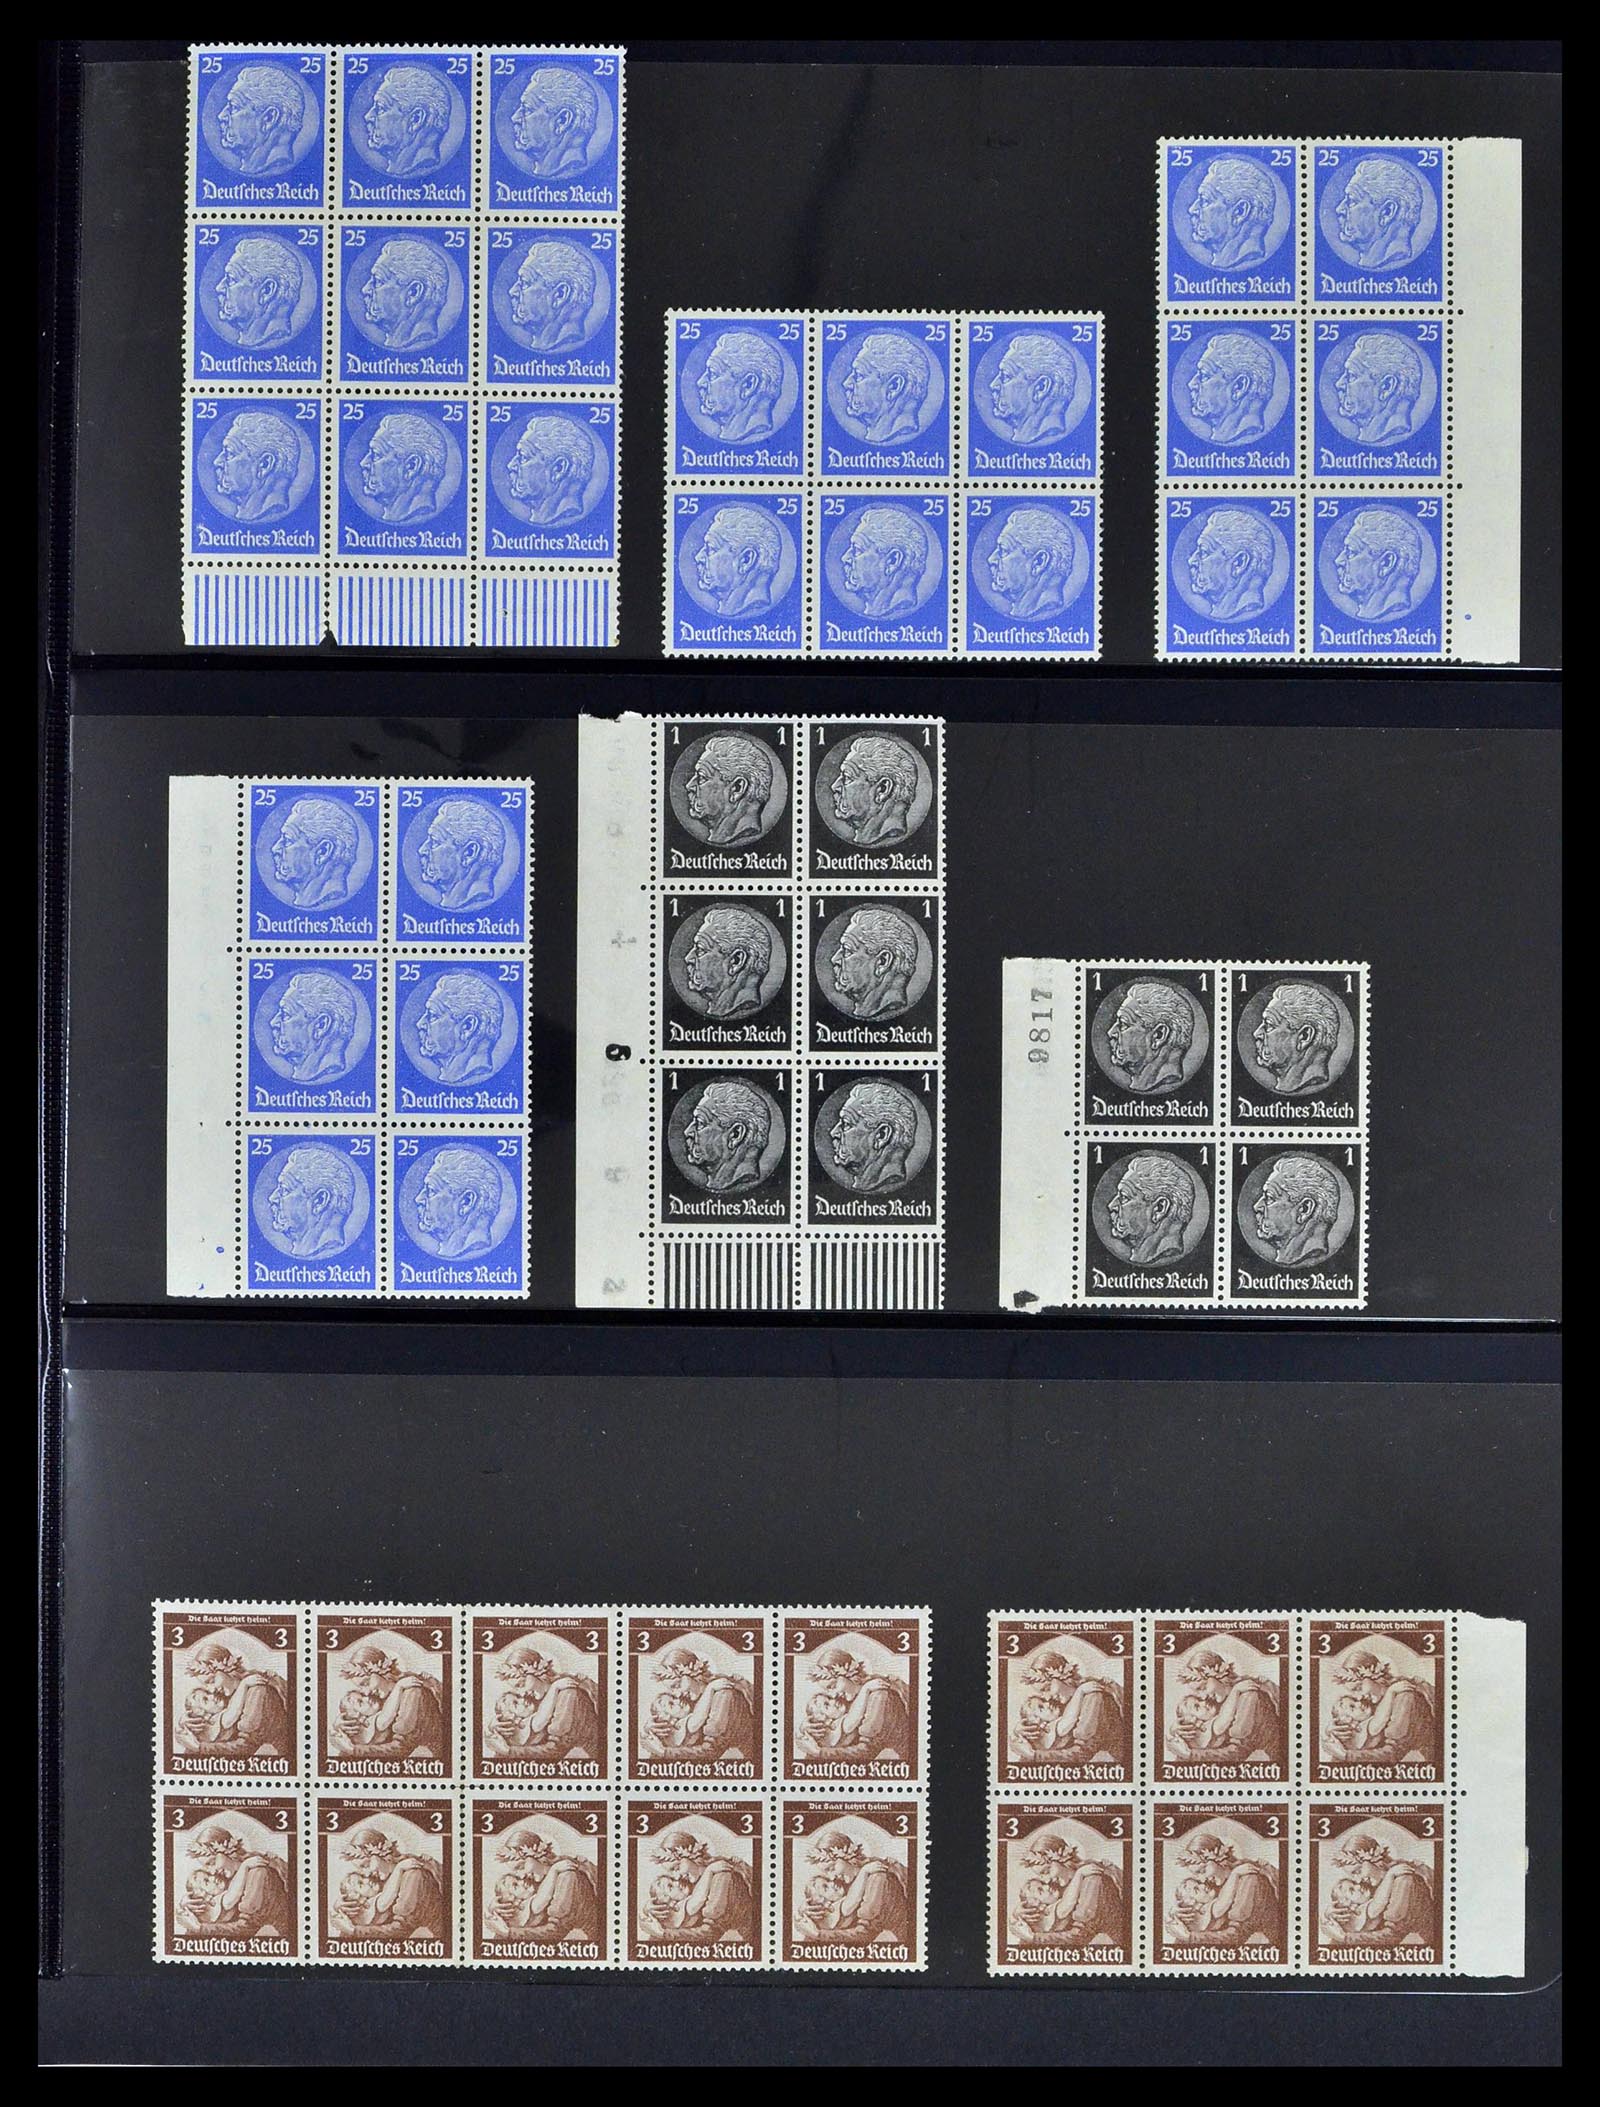 39255 0015 - Stamp collection 39255 German Reich MNH blocks of 4.